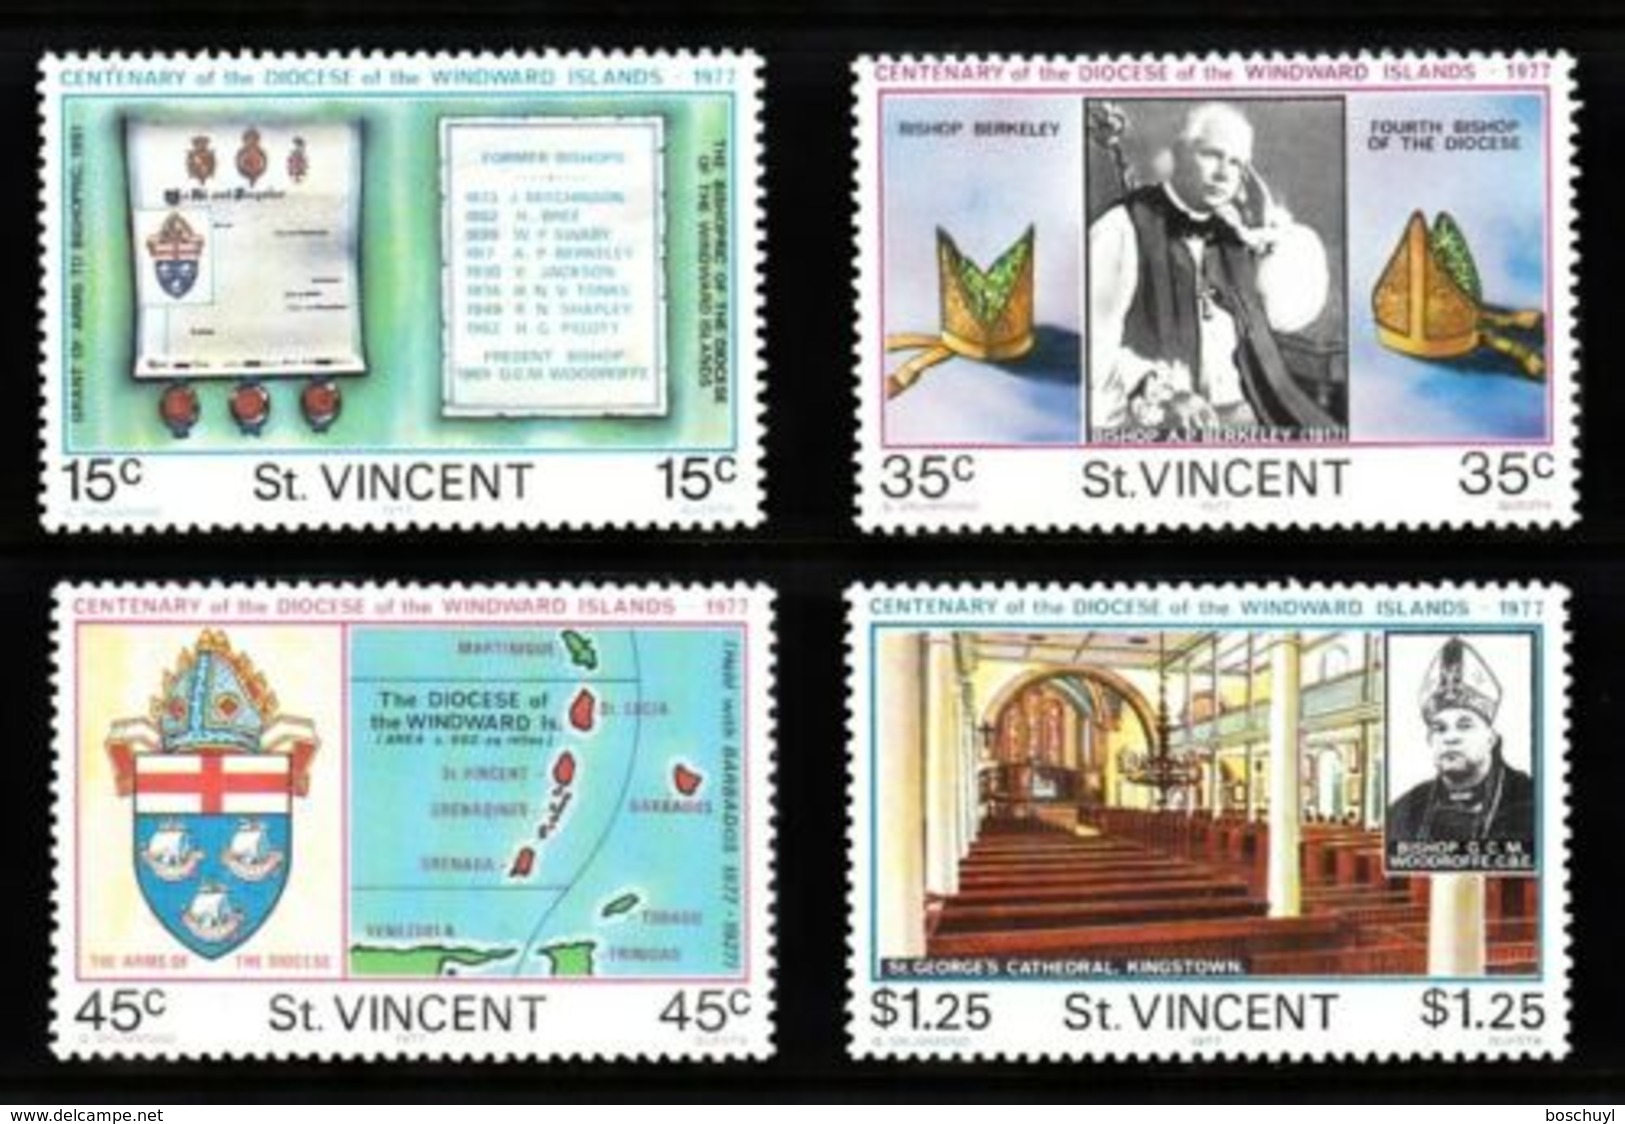 St. Vincent, 1977, Centenary Of Anglican Diocese, MNH, Michel 471-474 - St.Vincent (...-1979)